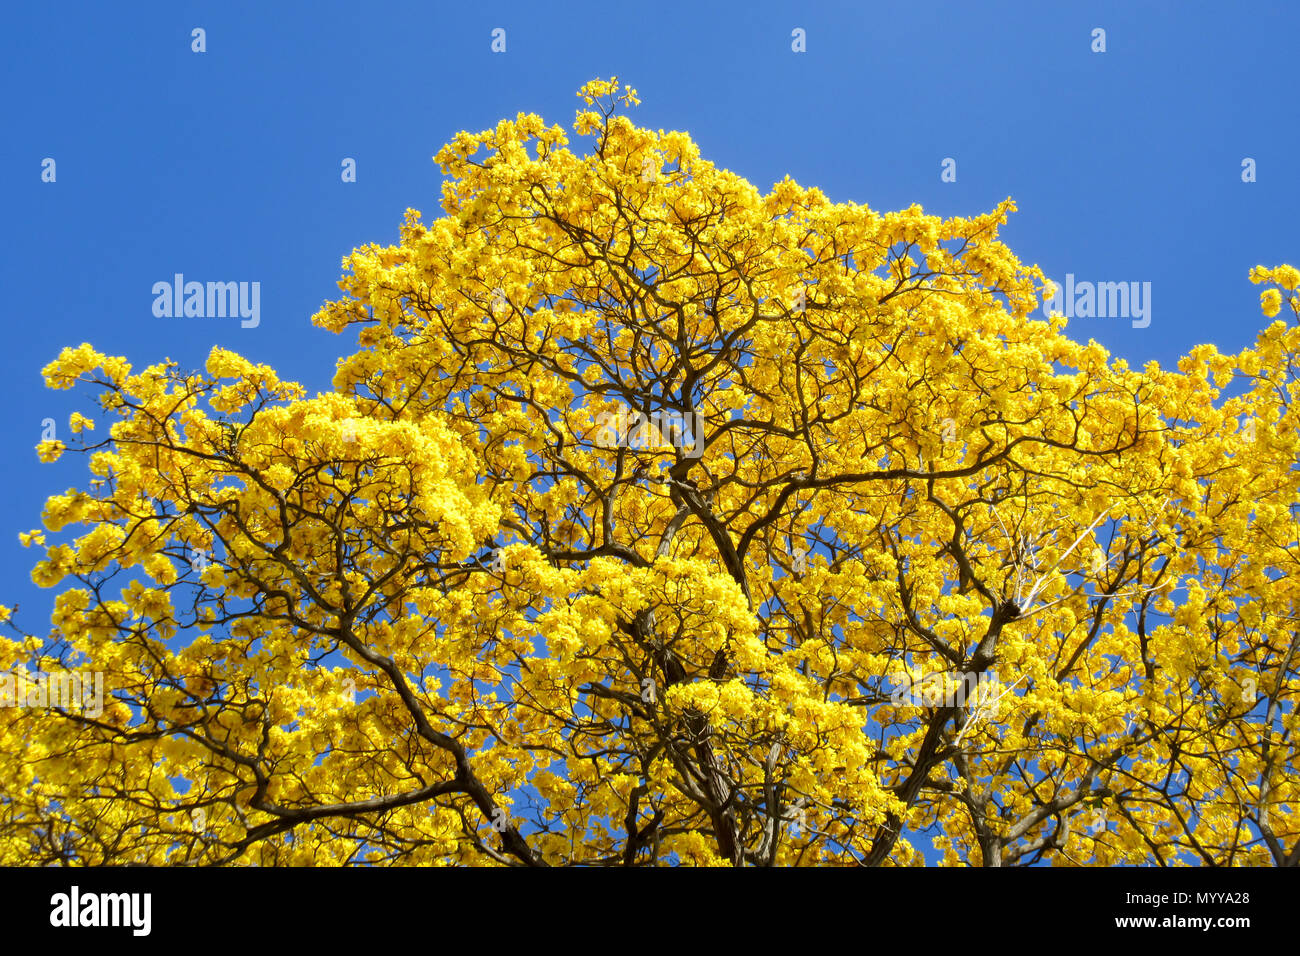 A striking contrast of nature's hues: a majestic yellow tree stands tall against the clear blue sky Stock Photo